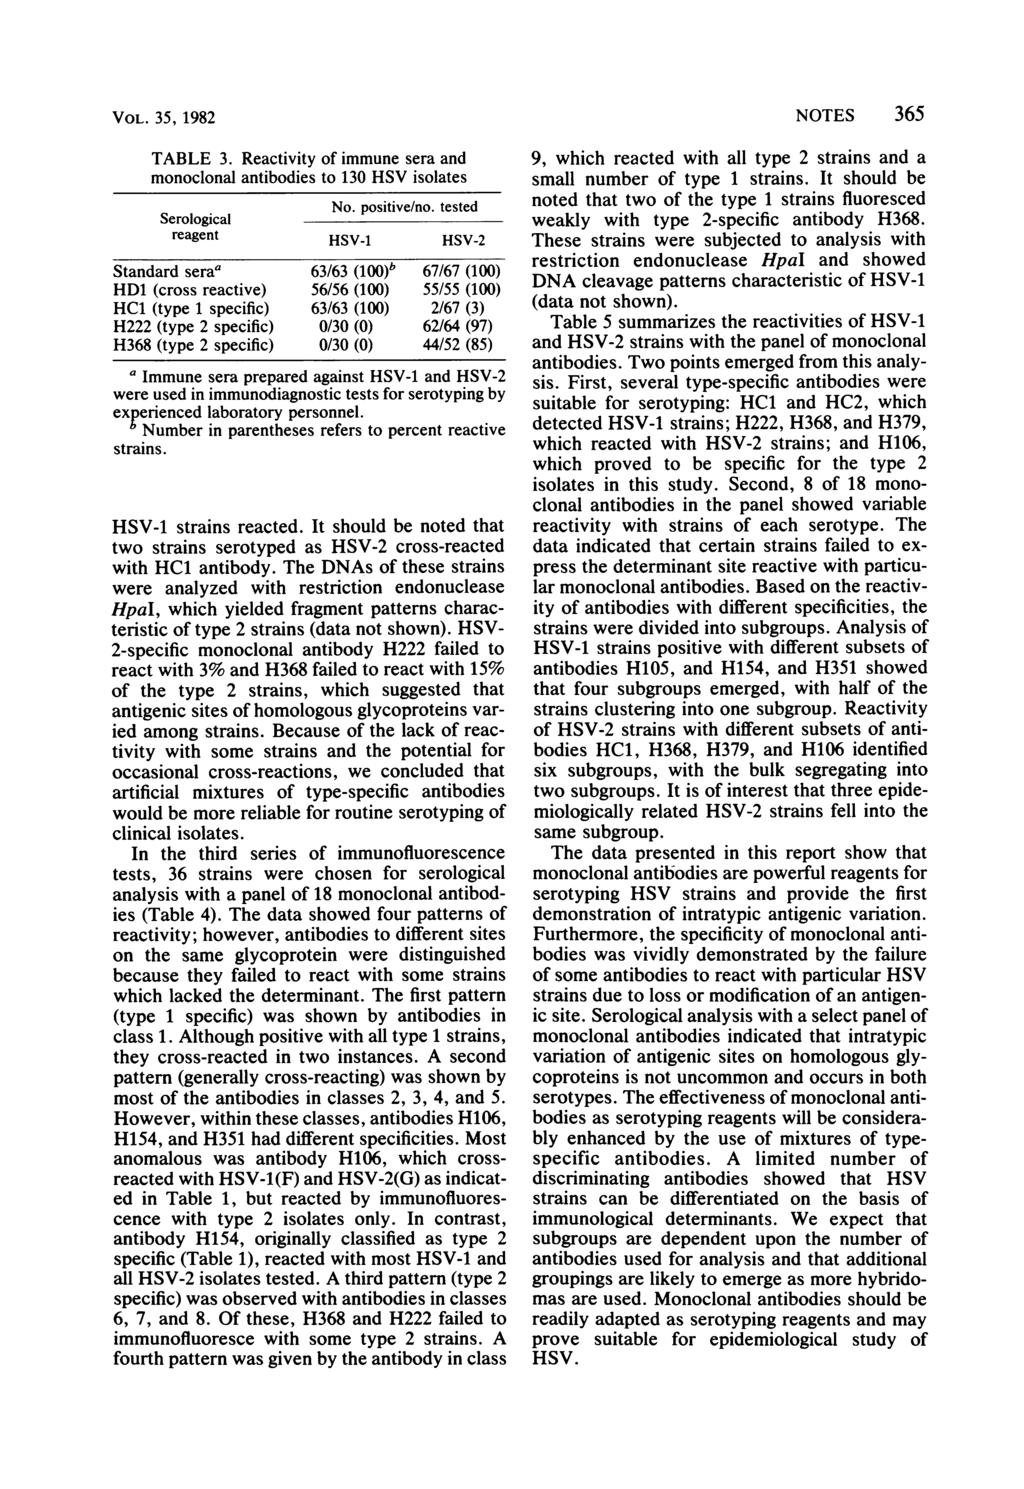 VOL. 35, 1982 TABLE 3. Reactivity of immune sera and monoclonal antibodies to 13 HSV isolates No. positive/no.